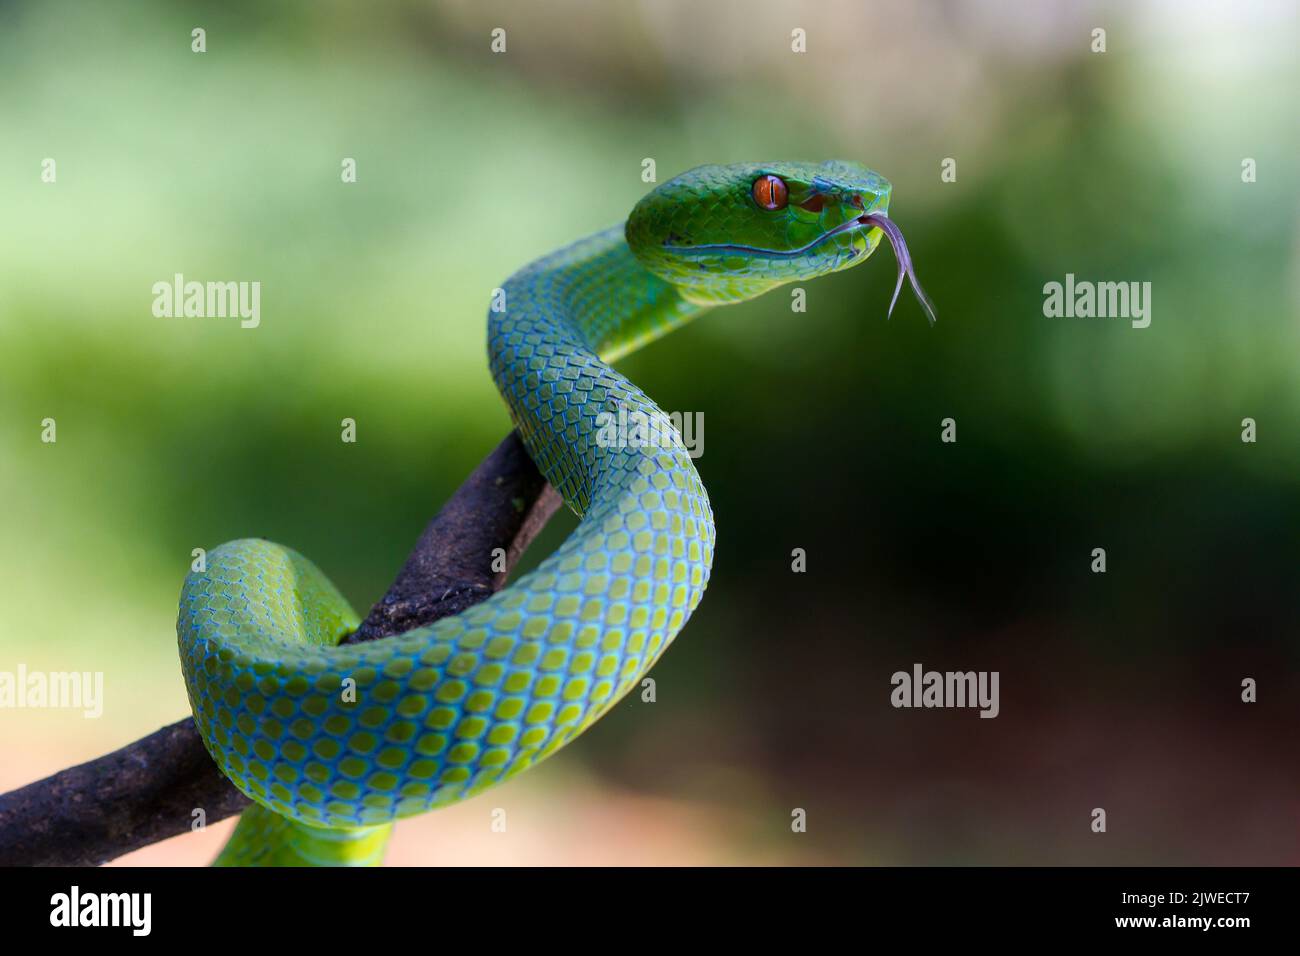 Close-up of a green tree pit viper coiled on a branch, Indonesia Stock Photo